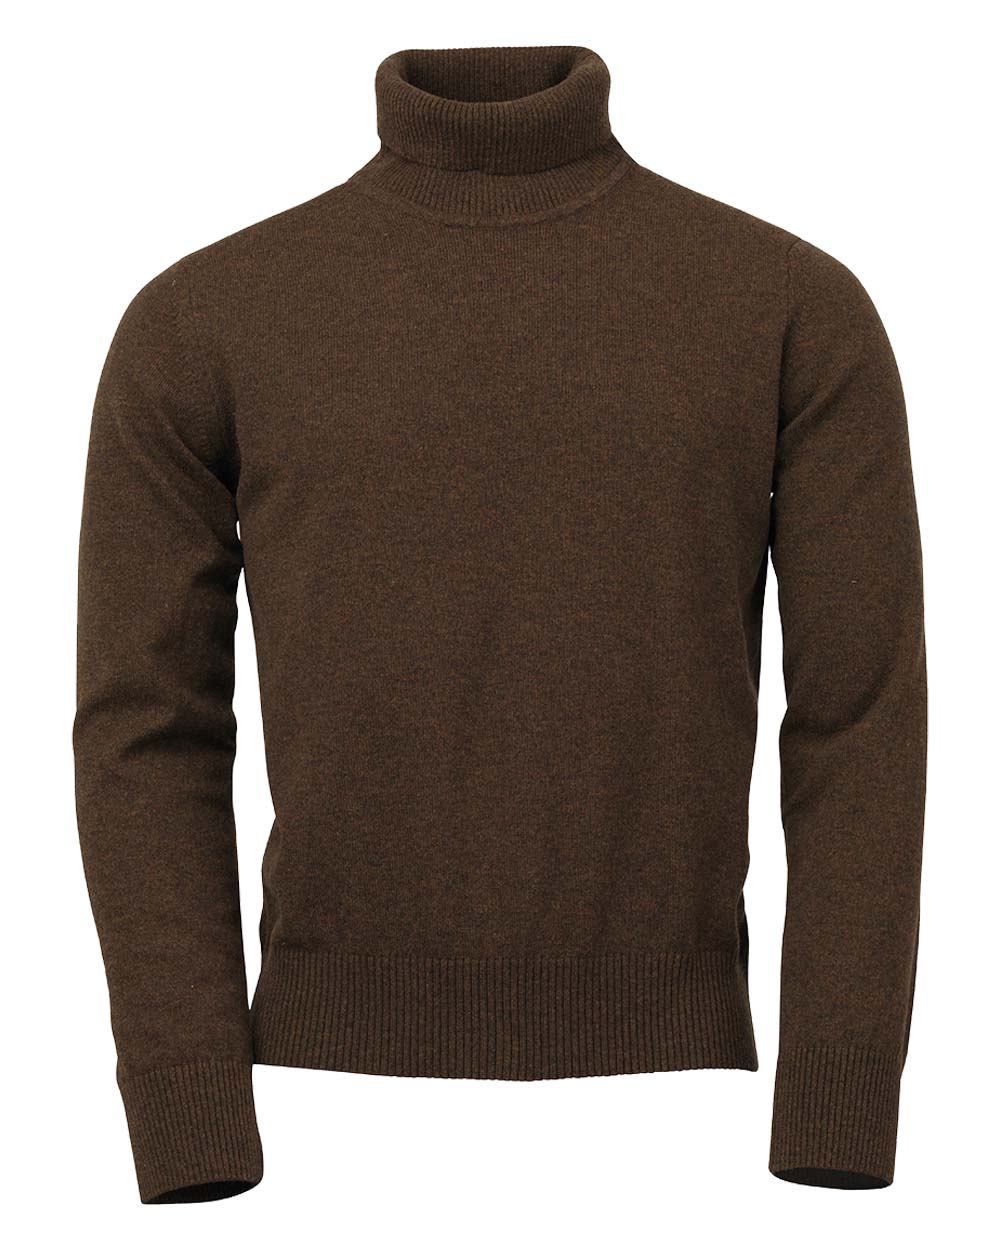 Brownie coloured Laksen Trool Lamswool Rollneck Sweater on White background 